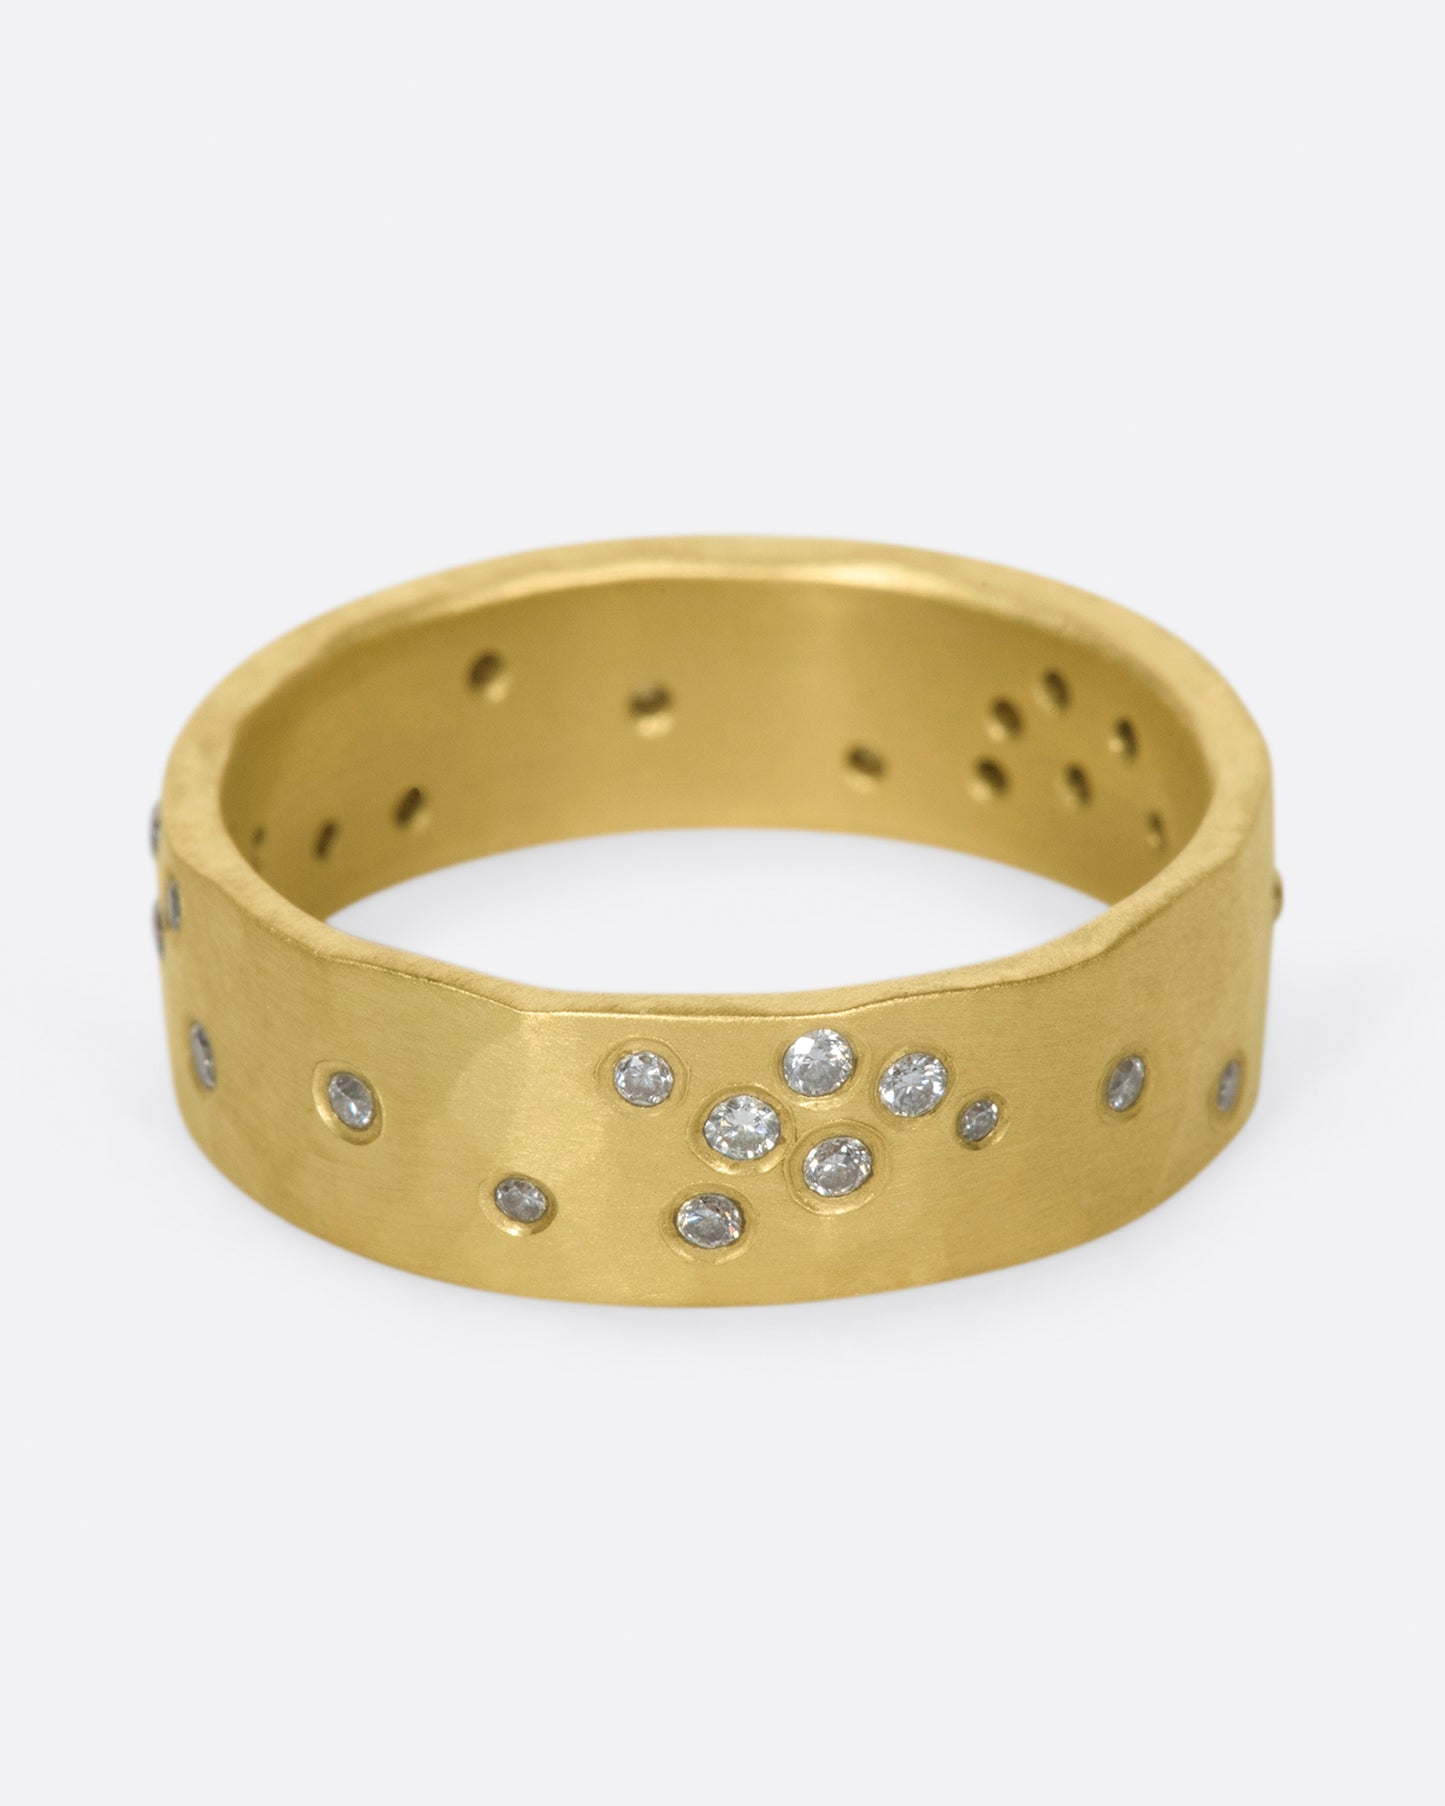 A constellation of thirty sparkling white diamonds set on a wide, hammered, matte gold band.